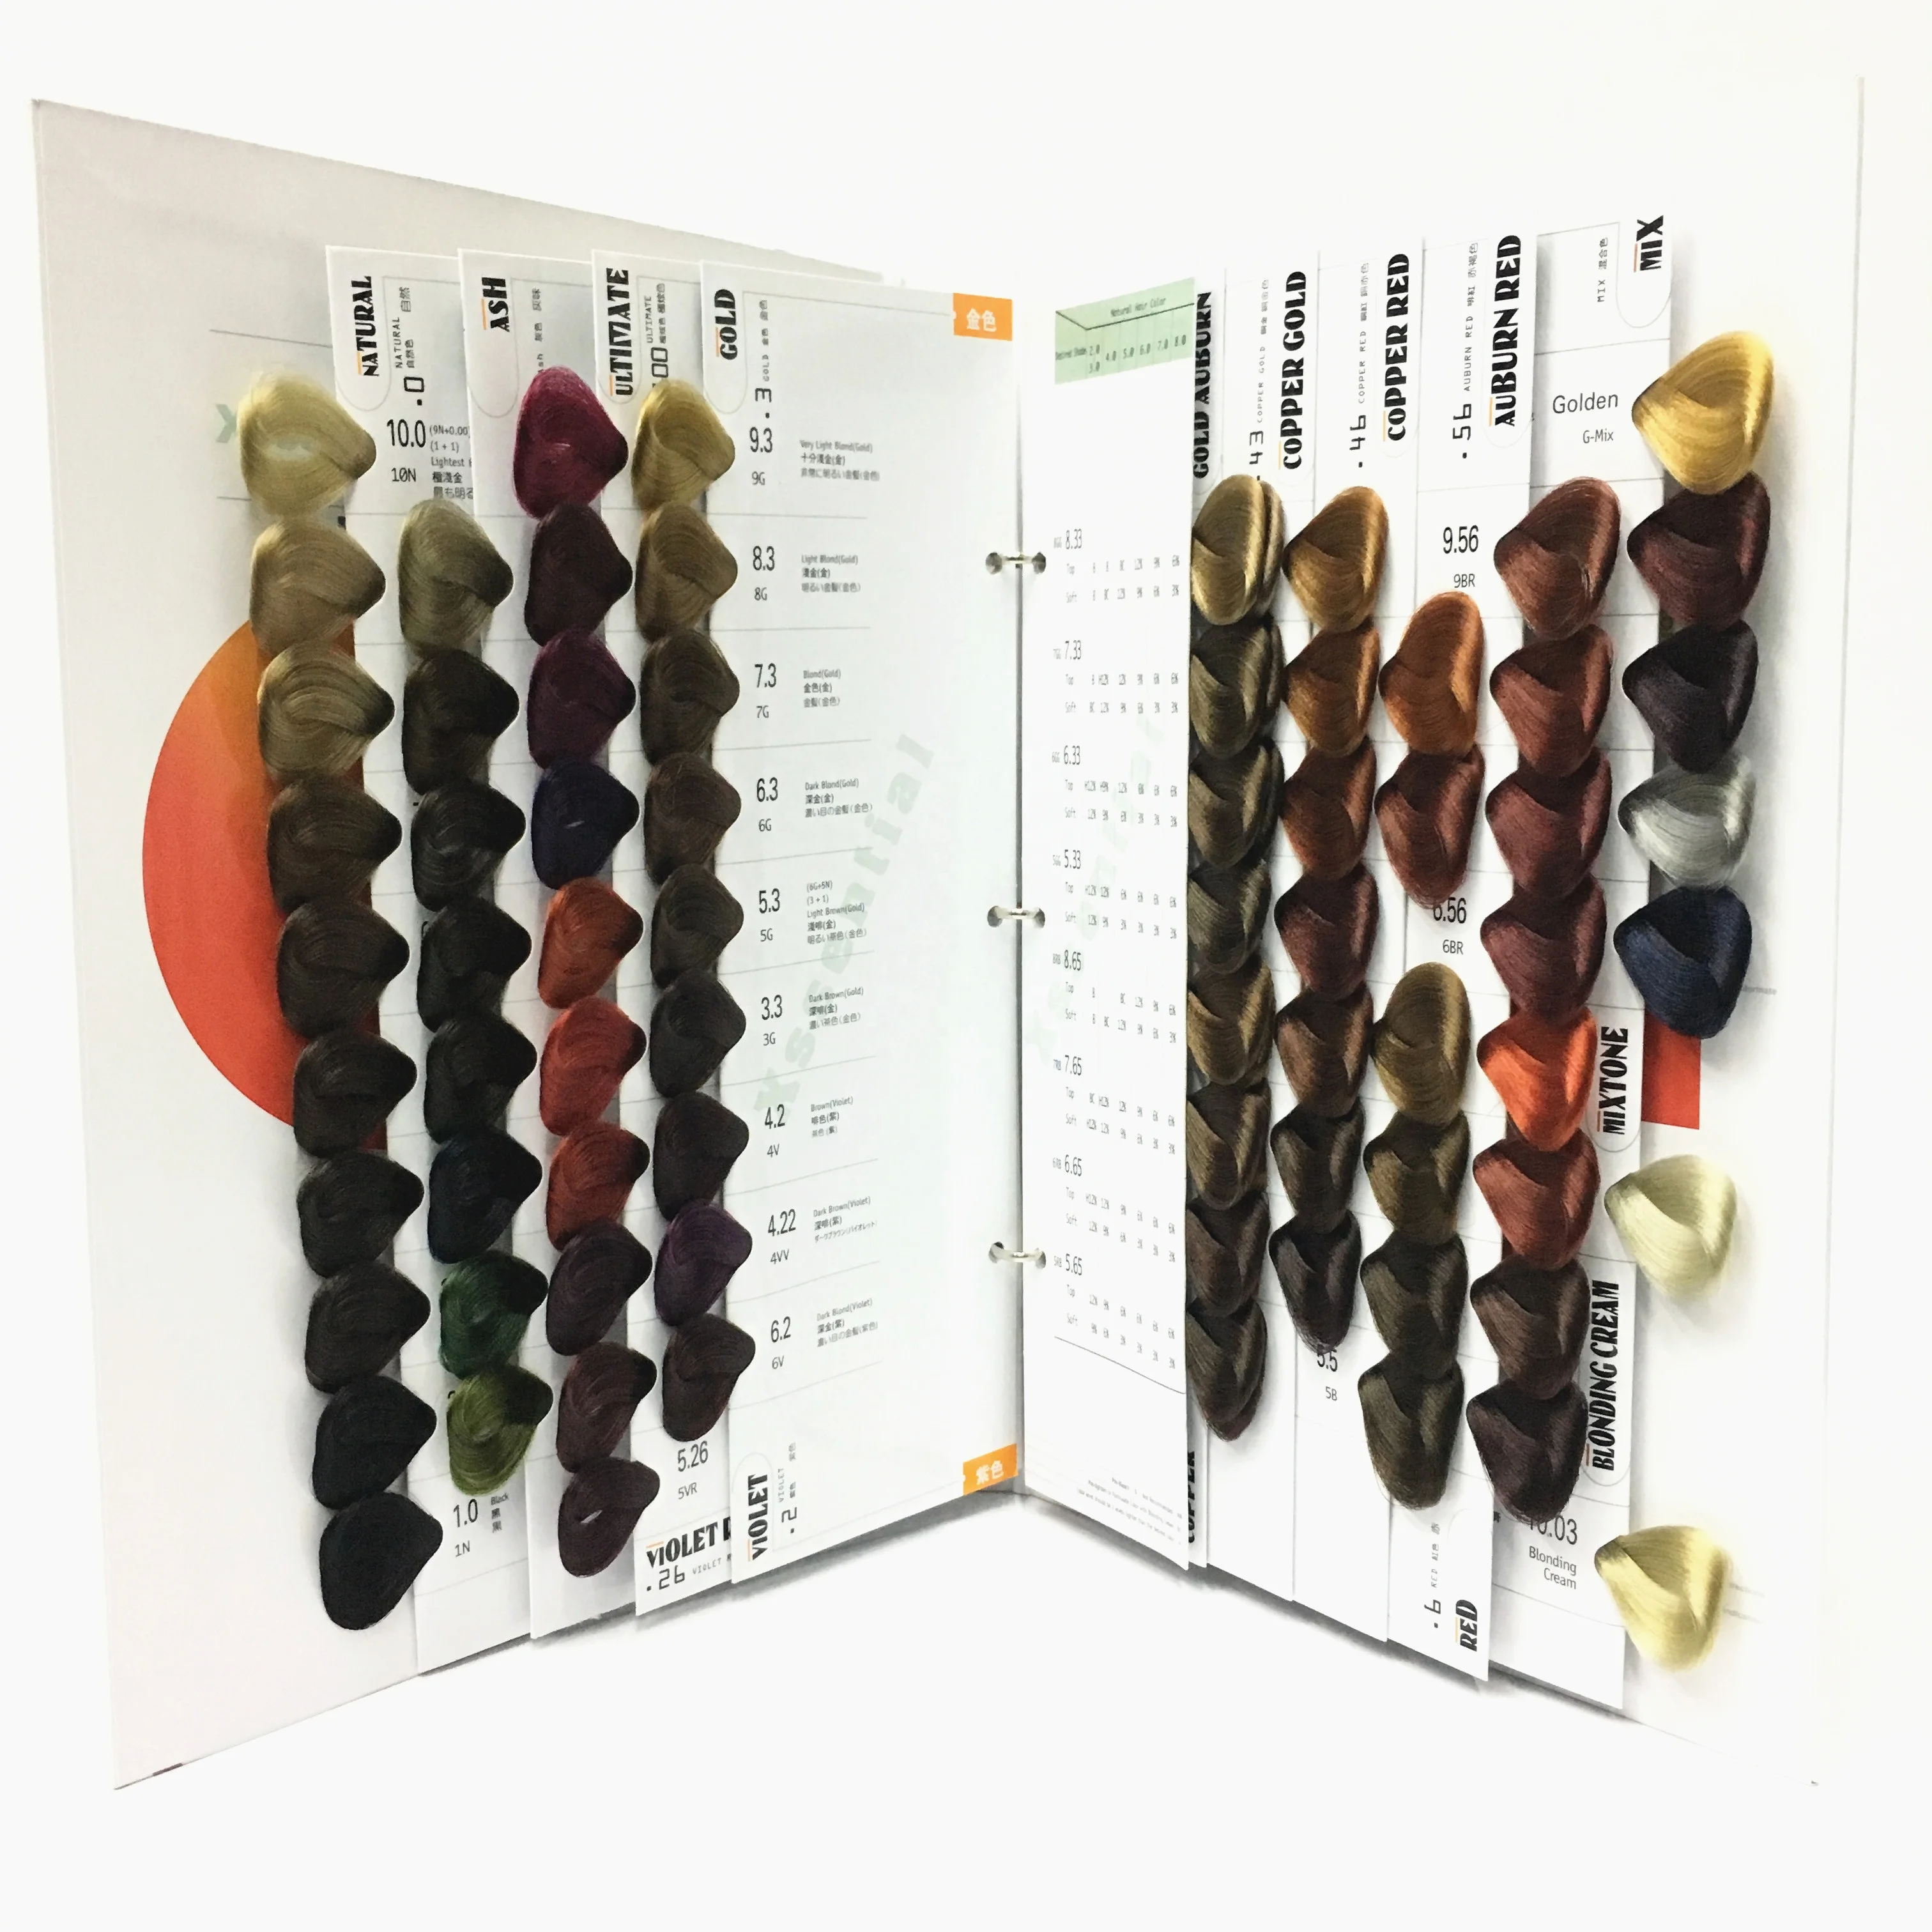 Oem Loose Leaf Hair Level Swatch Book Hair Color Catalog Buy Hair Colour Chart Professional Redken Hair Swatch Book Garnier Hair Color Catalogue Product On Alibaba Com